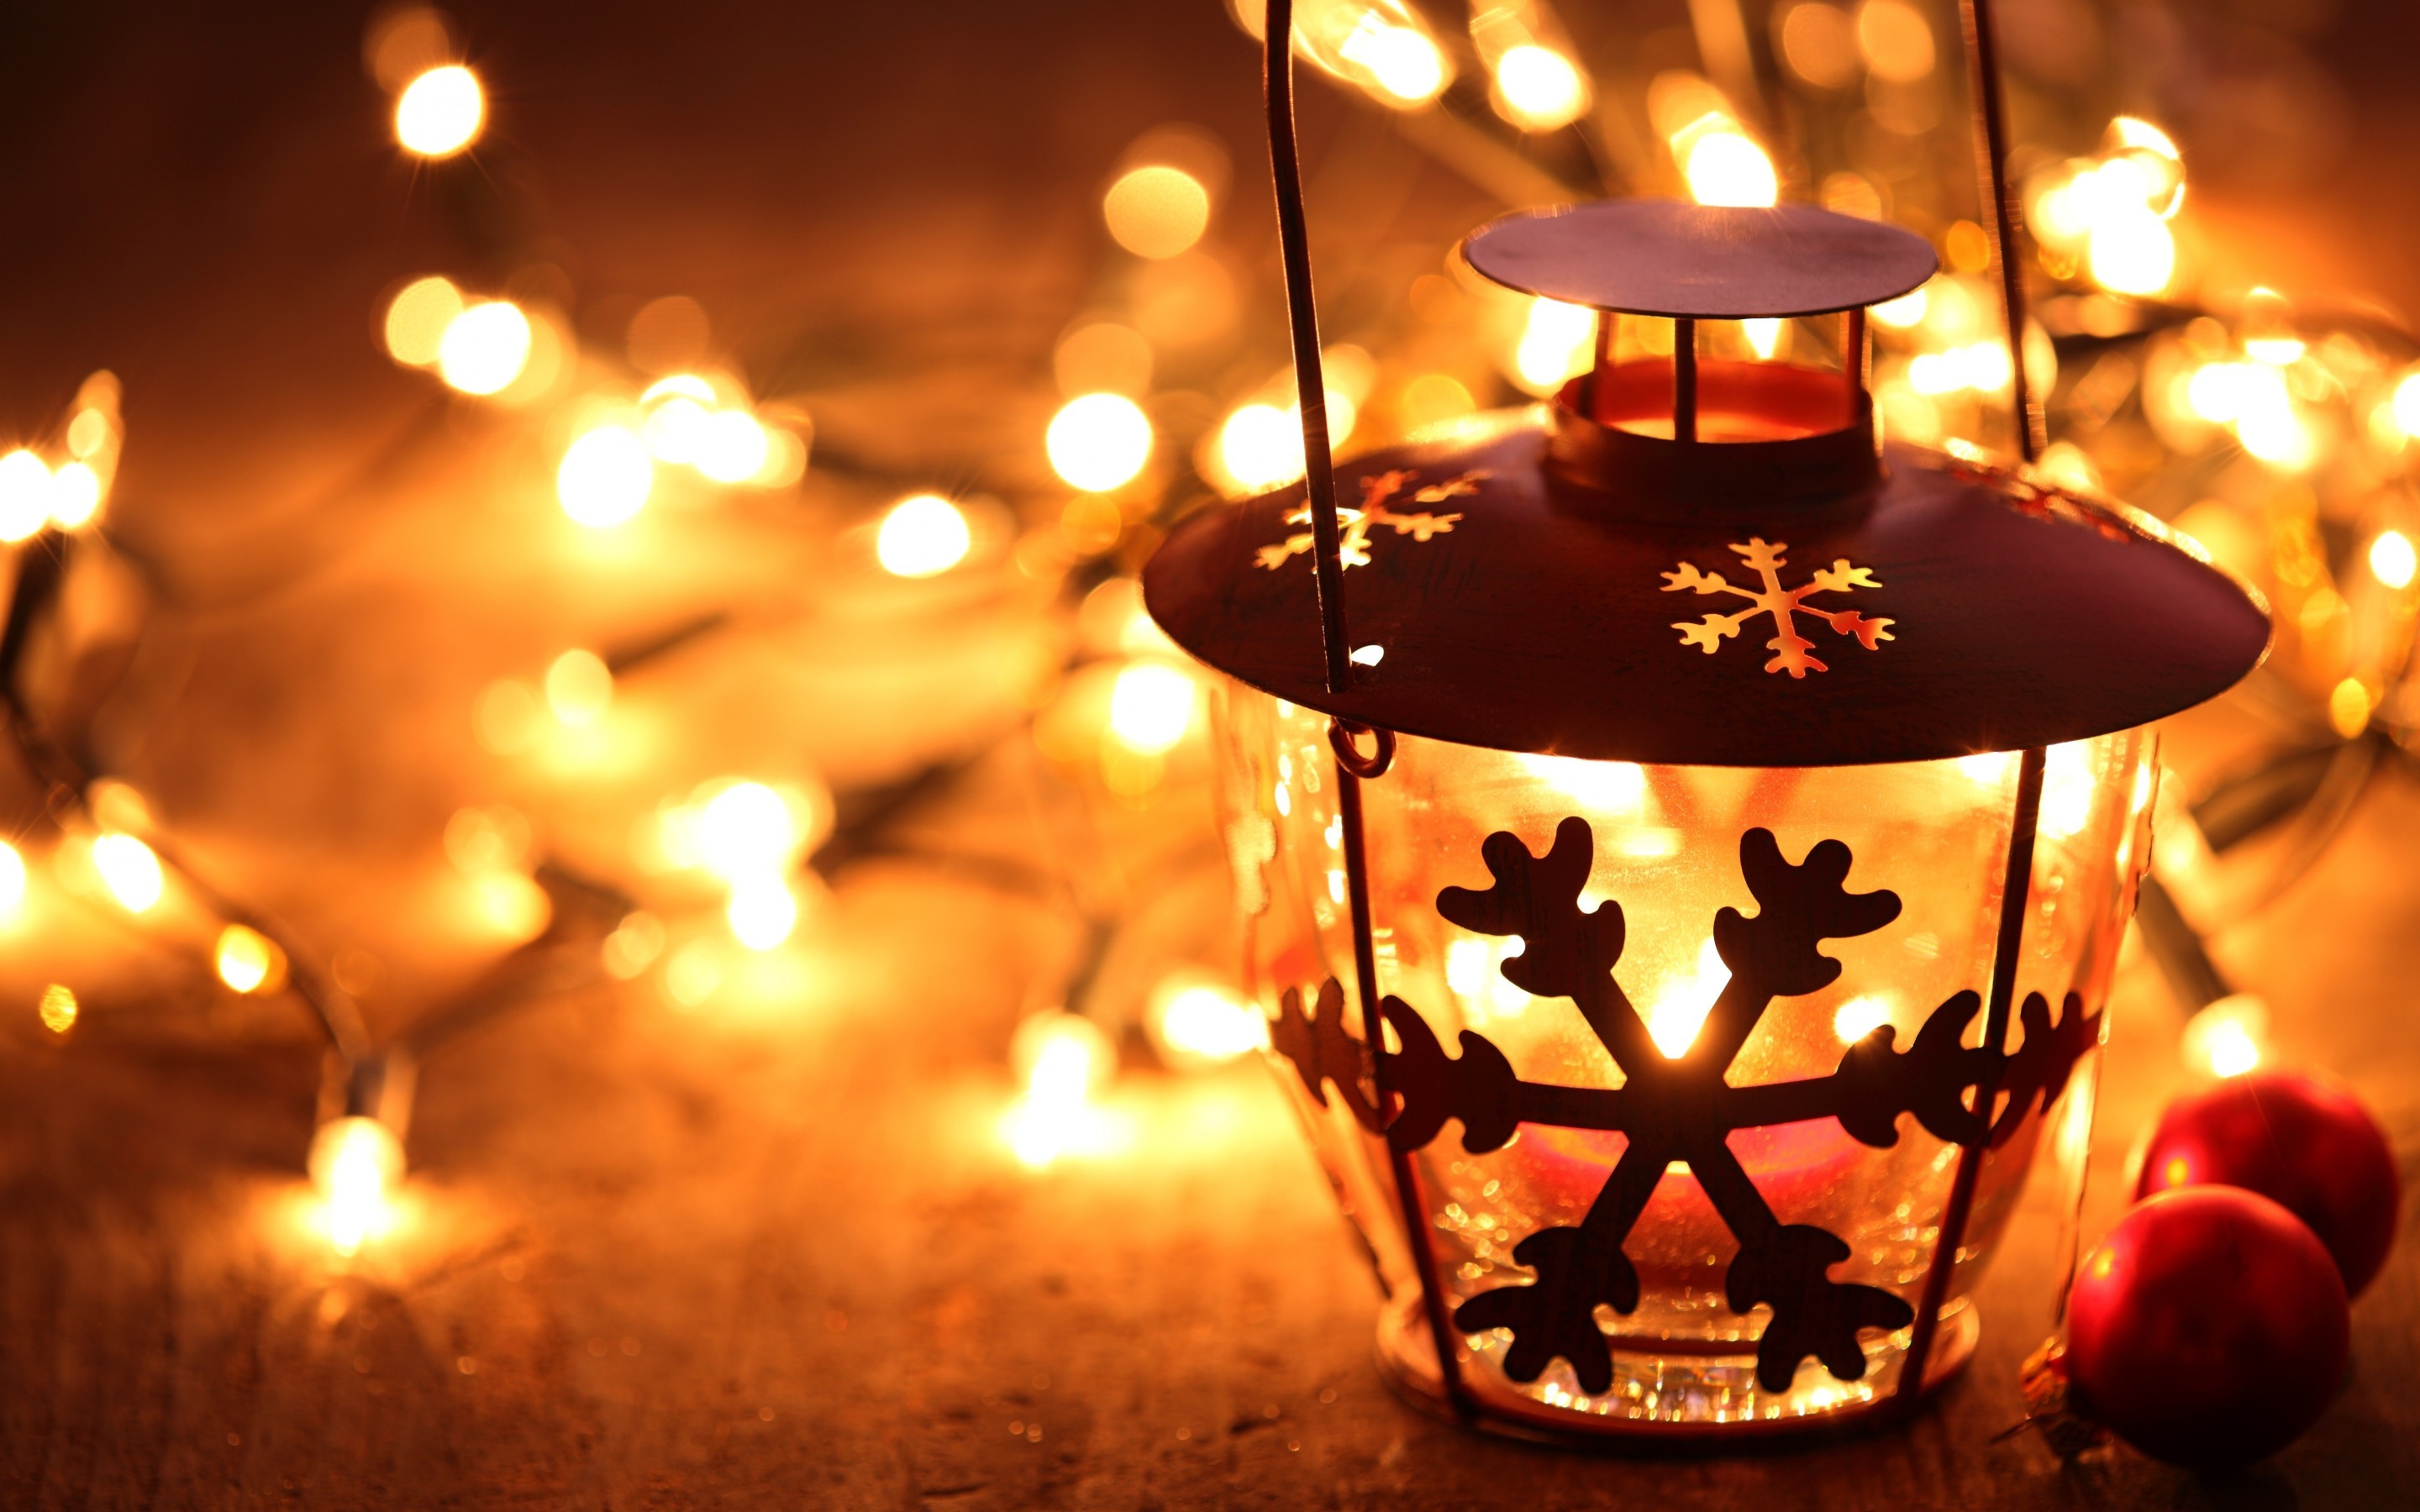 Snowflake lantern on wooden floor with yellow candle light